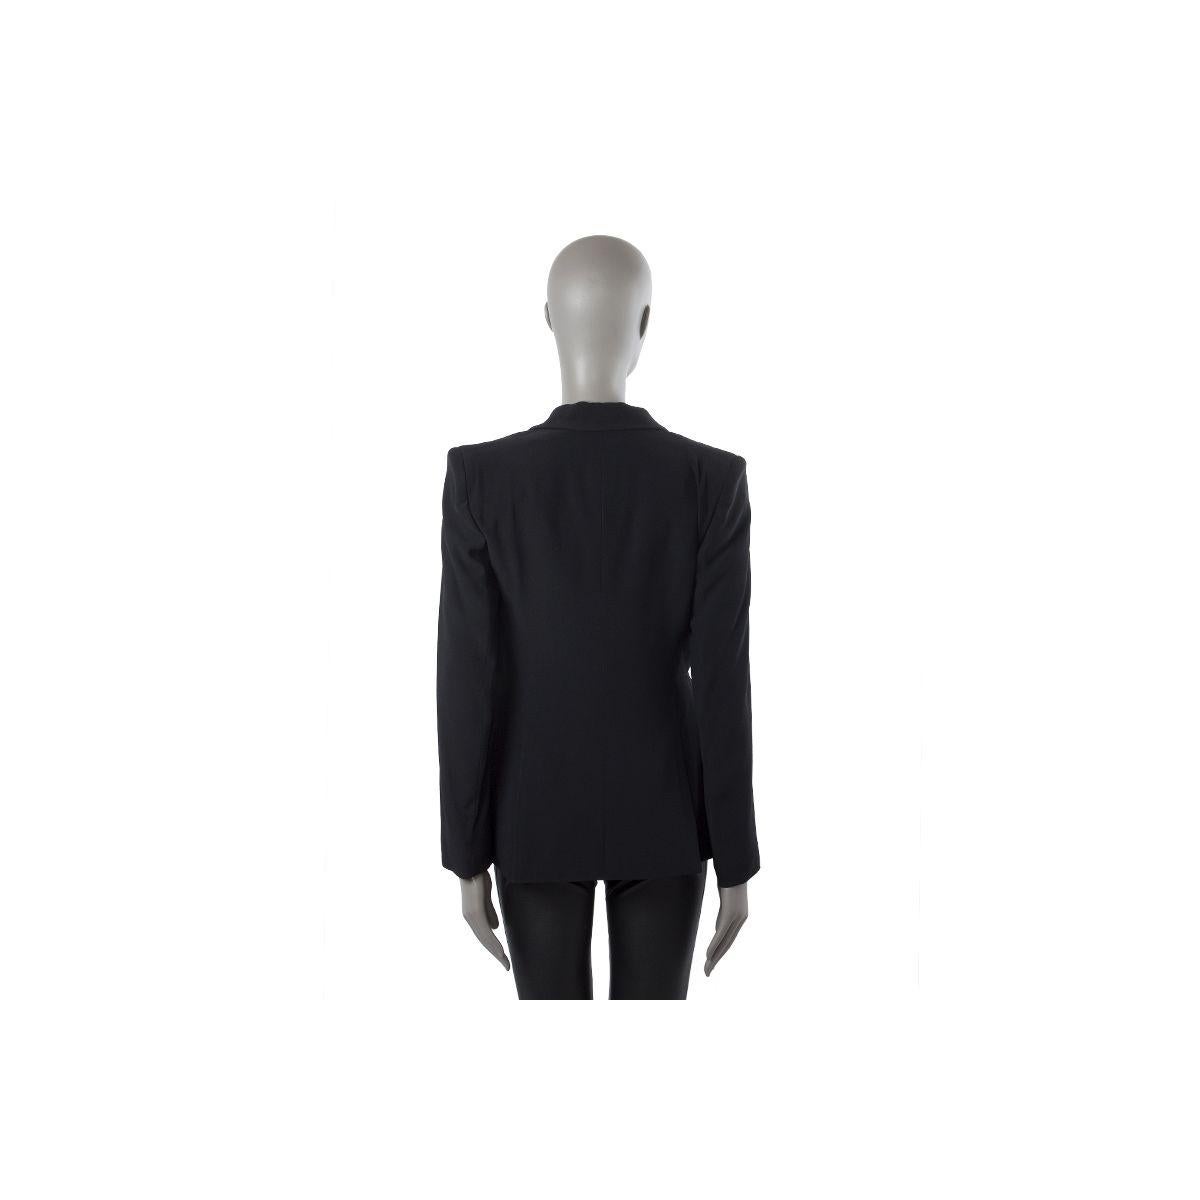 100% authentic Alexander McQueen tuxedo jacket in black acetate (50%) and viscose (50%). With satin peak collar, one chest pocket, two front flap pockets, and two back slits. Closes with one black and golden rhinestone flower button on the front.